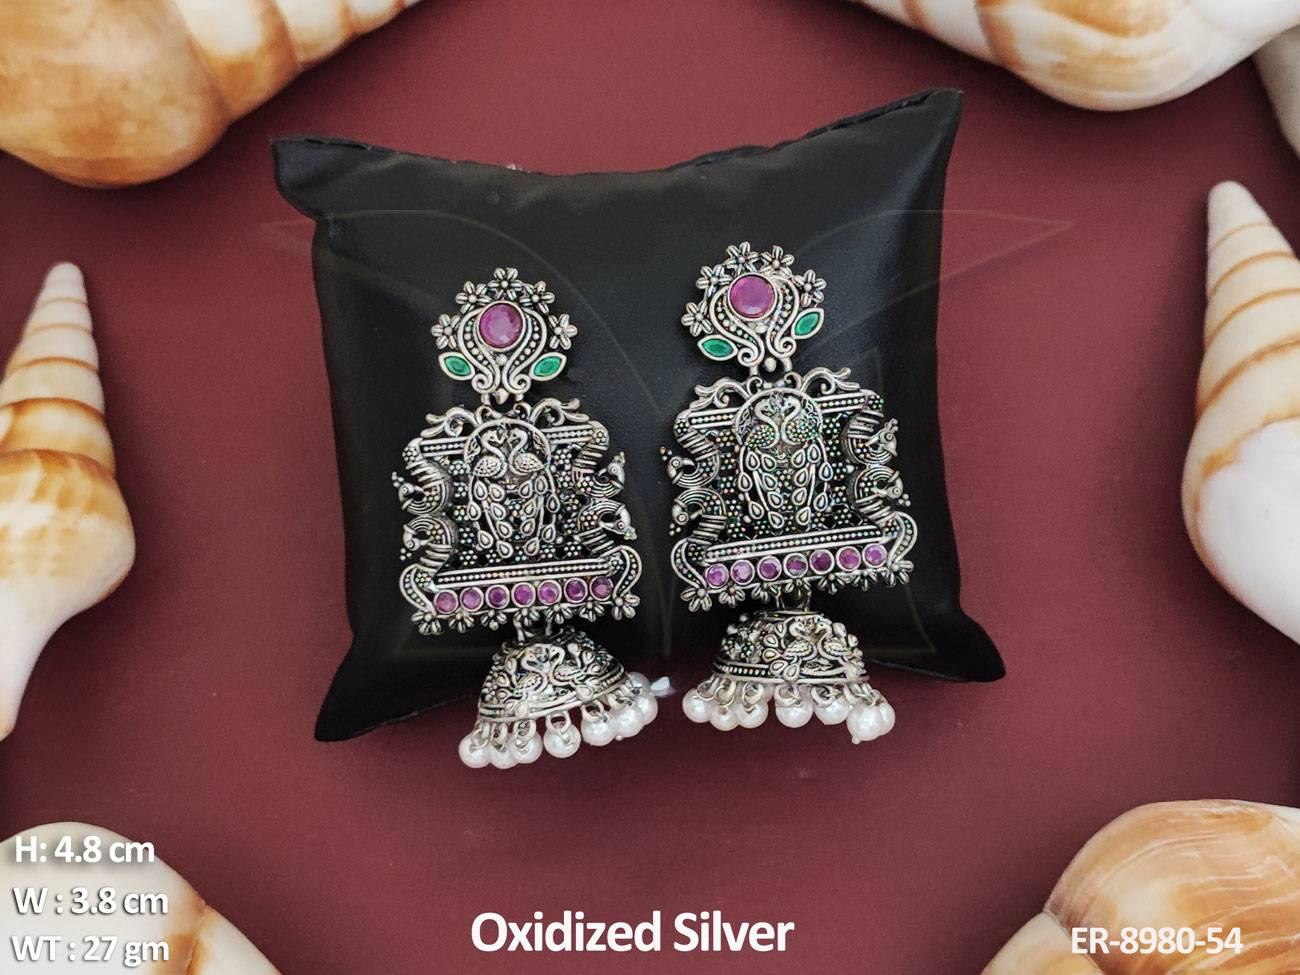 Made with high-quality materials, these earrings are not only stunning but also durable.